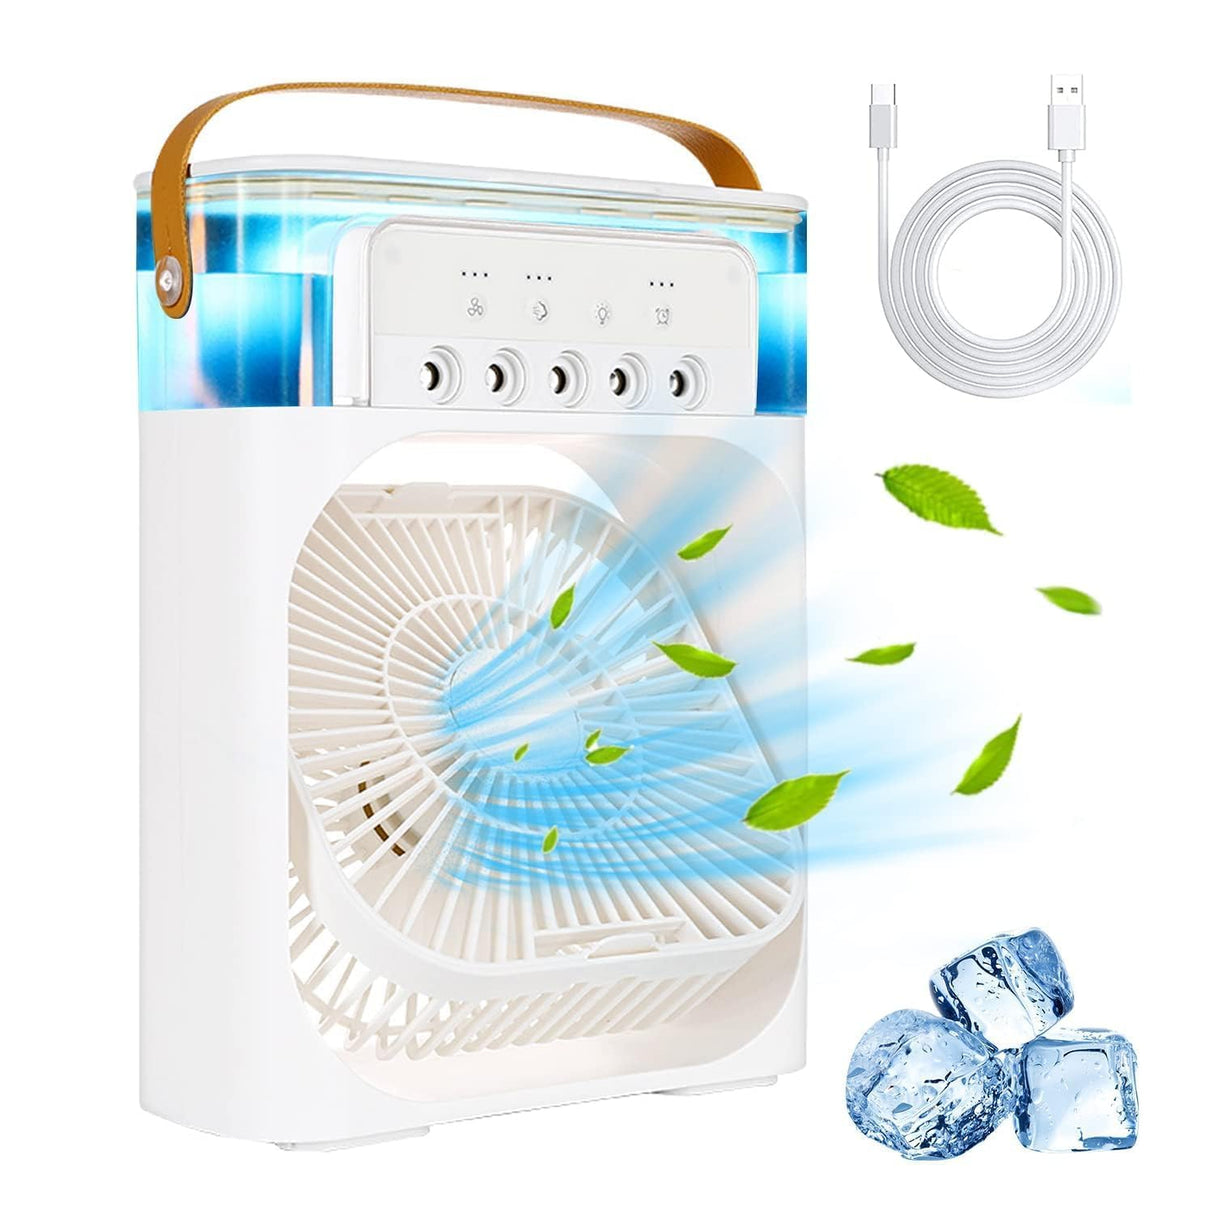 Mini Cooler for Room Cooling - Portable Air Cooler, 3 in 1 Home and Office Air Conditioner - Compact size with 7 color LED Light